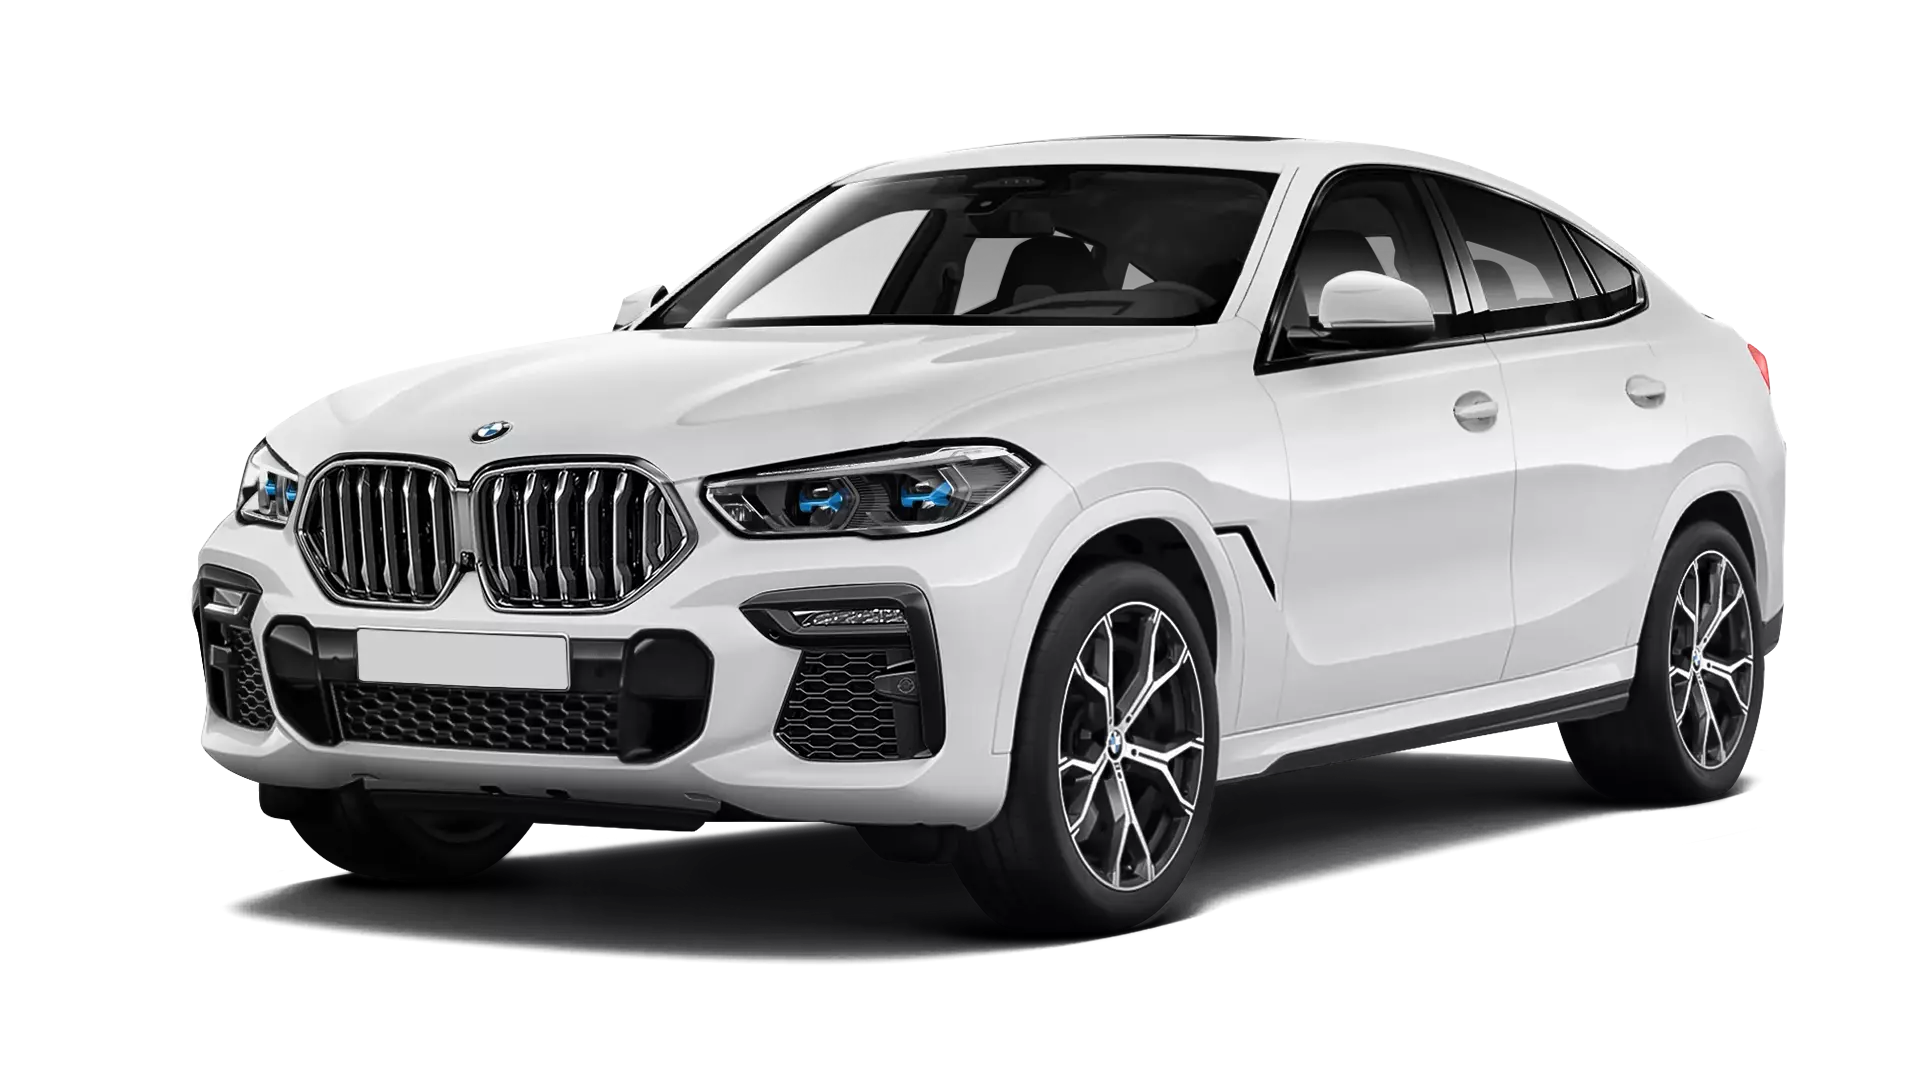 BMW X6 G06 stock front view in Snow White color